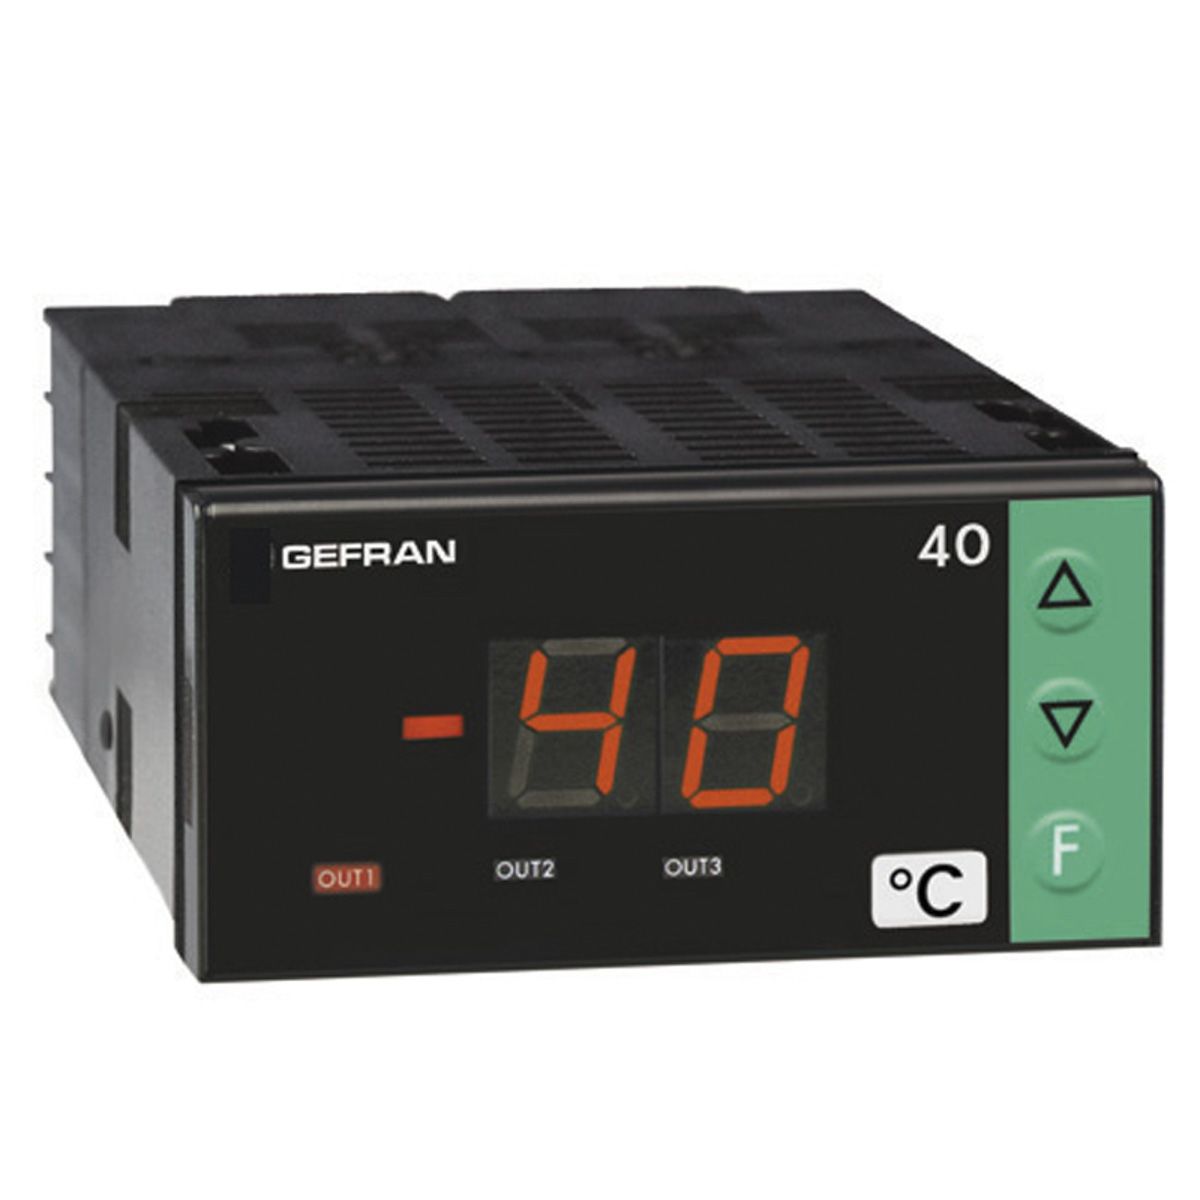 Gefran 40T-72-4-00-RR-00-9 , On/Off Temperature Controller